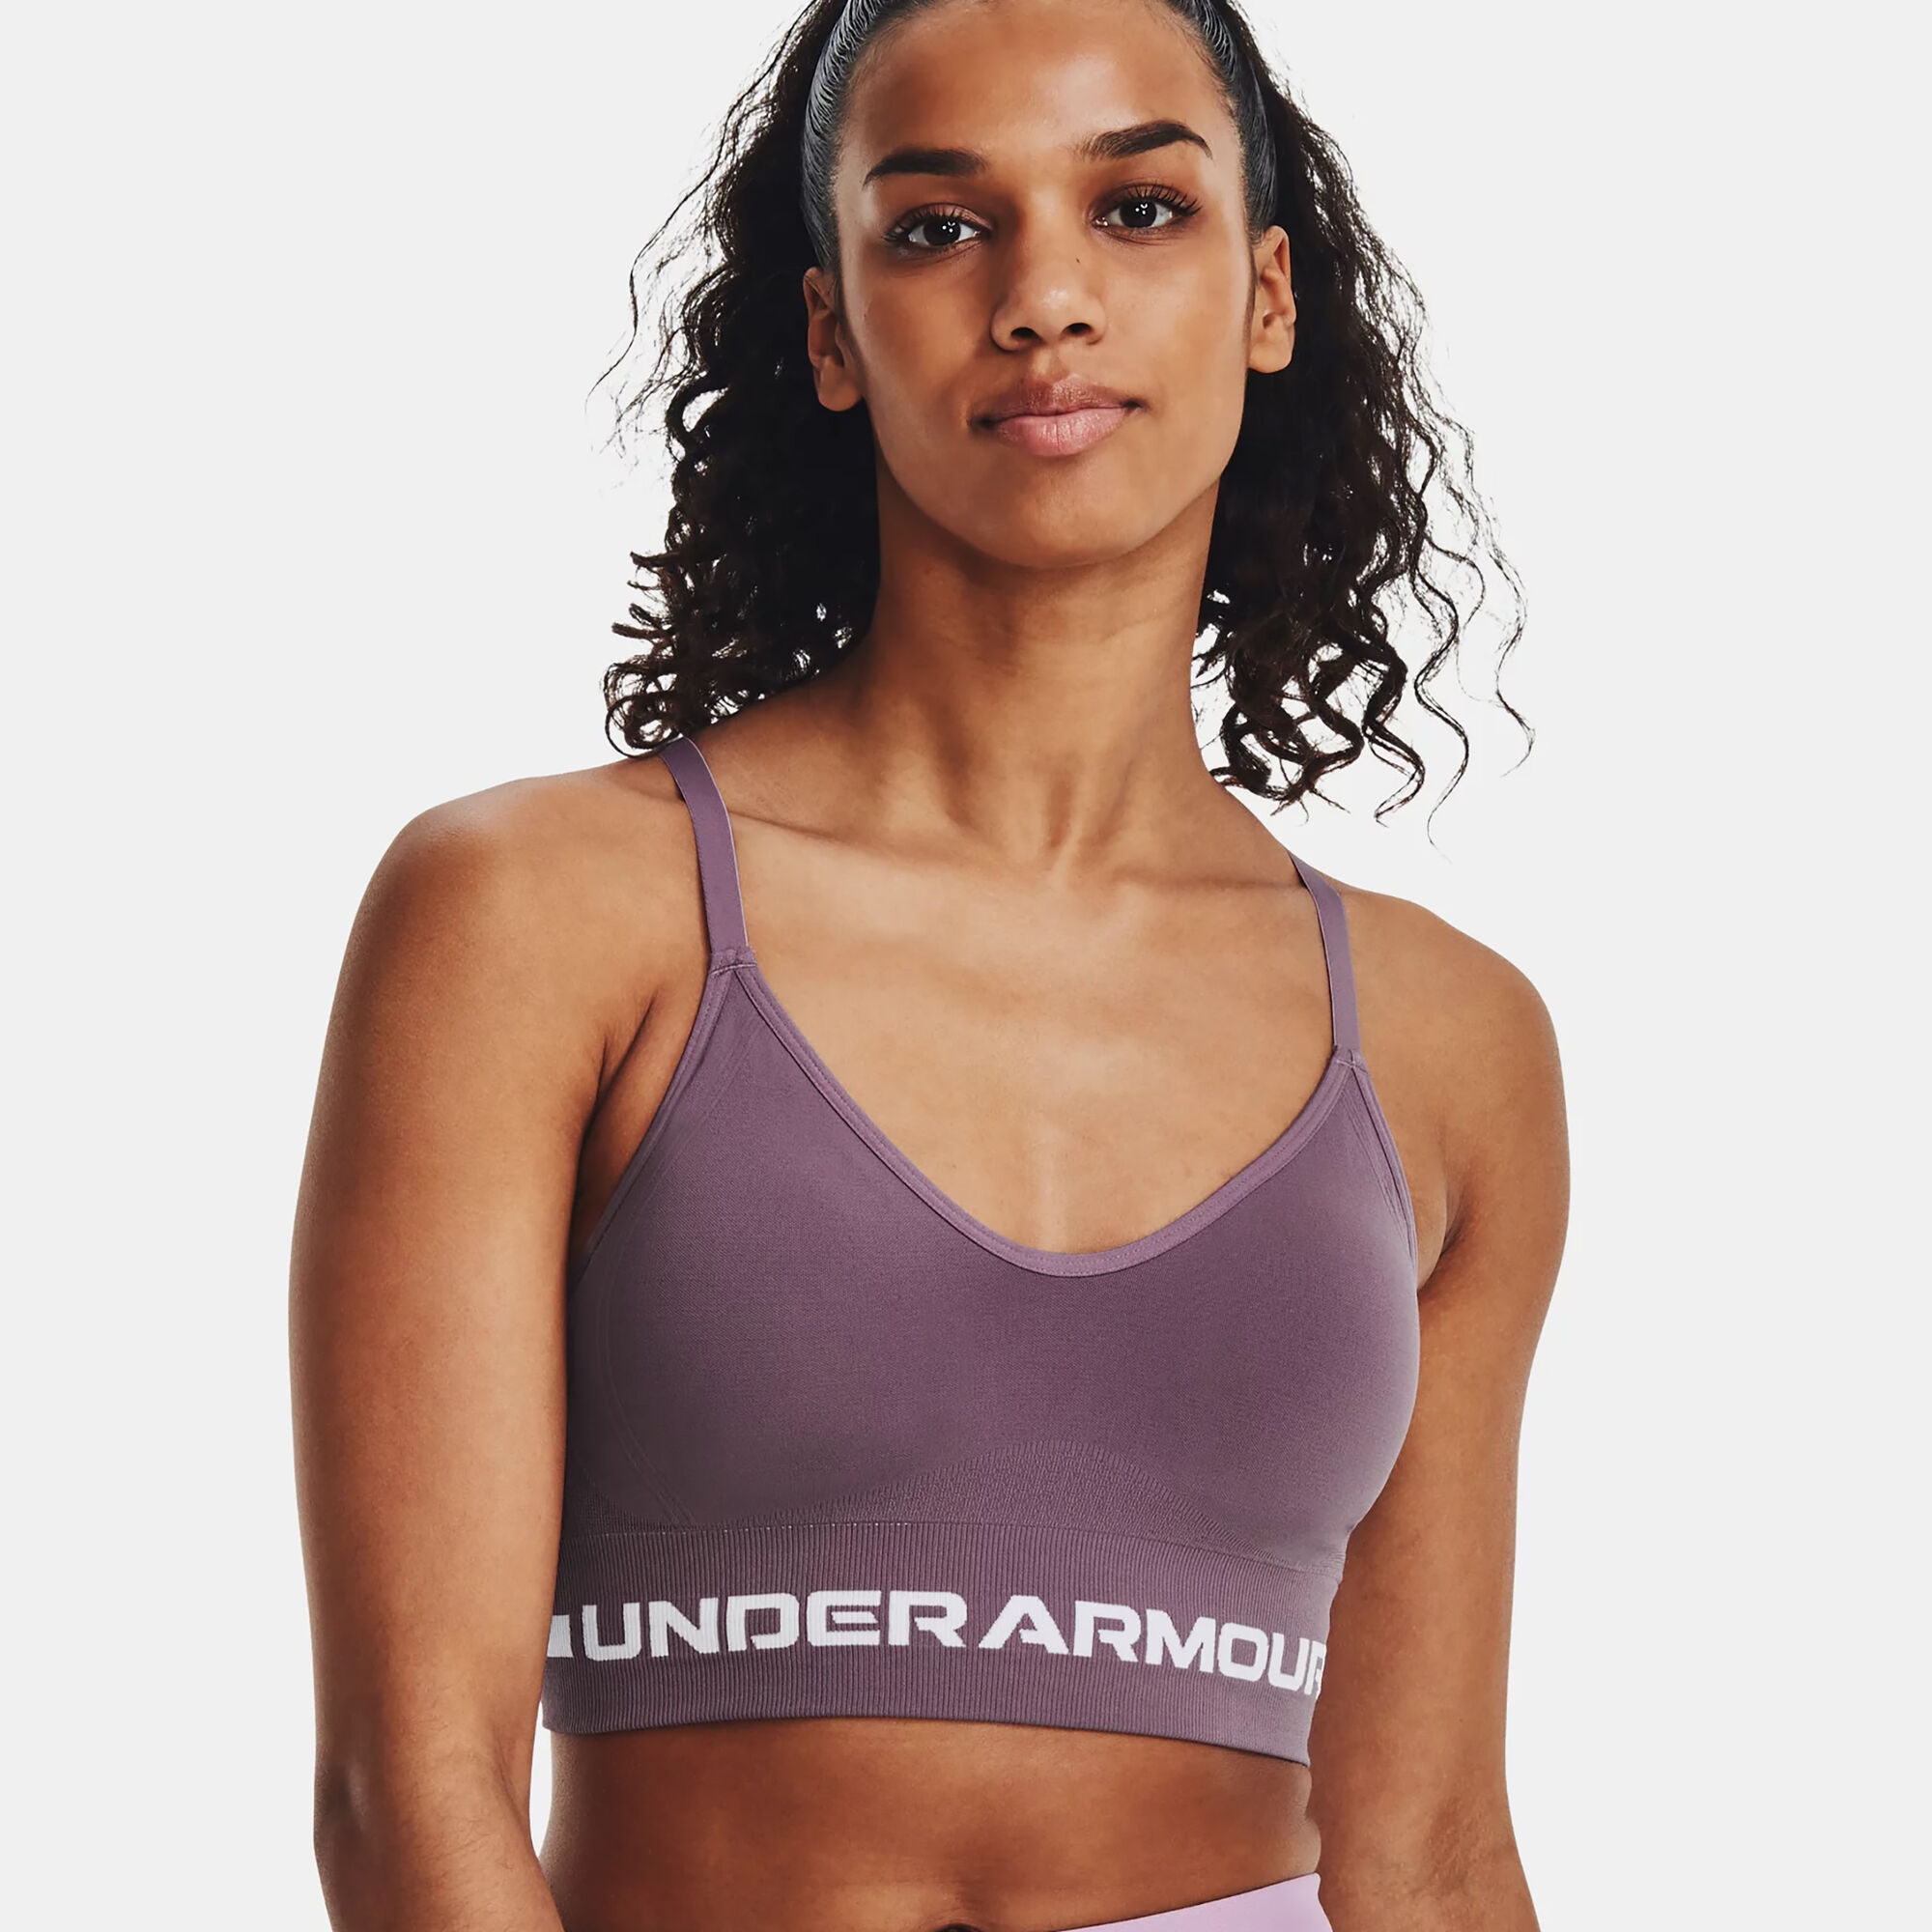 FITNESS CLOTHING Under Armour SEAMLESS LOW LONG - Sports Bras - Women's -  beta tint - Private Sport Shop